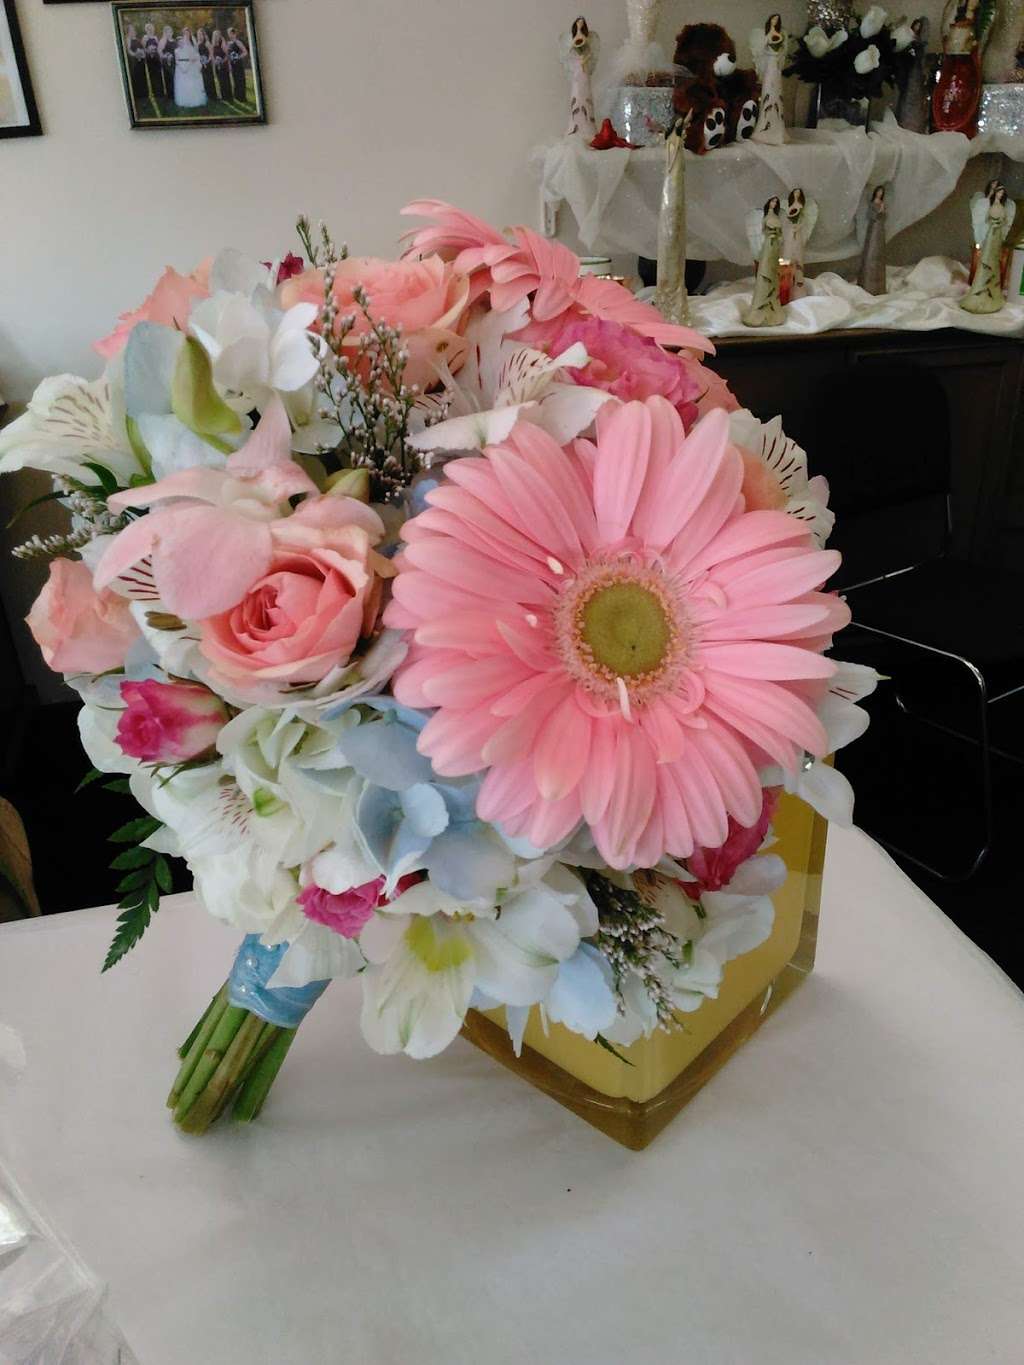 Rosette Floral & Gifts | 771 E Drinker St, Dunmore, PA 18512, USA | Phone: (570) 346-4009